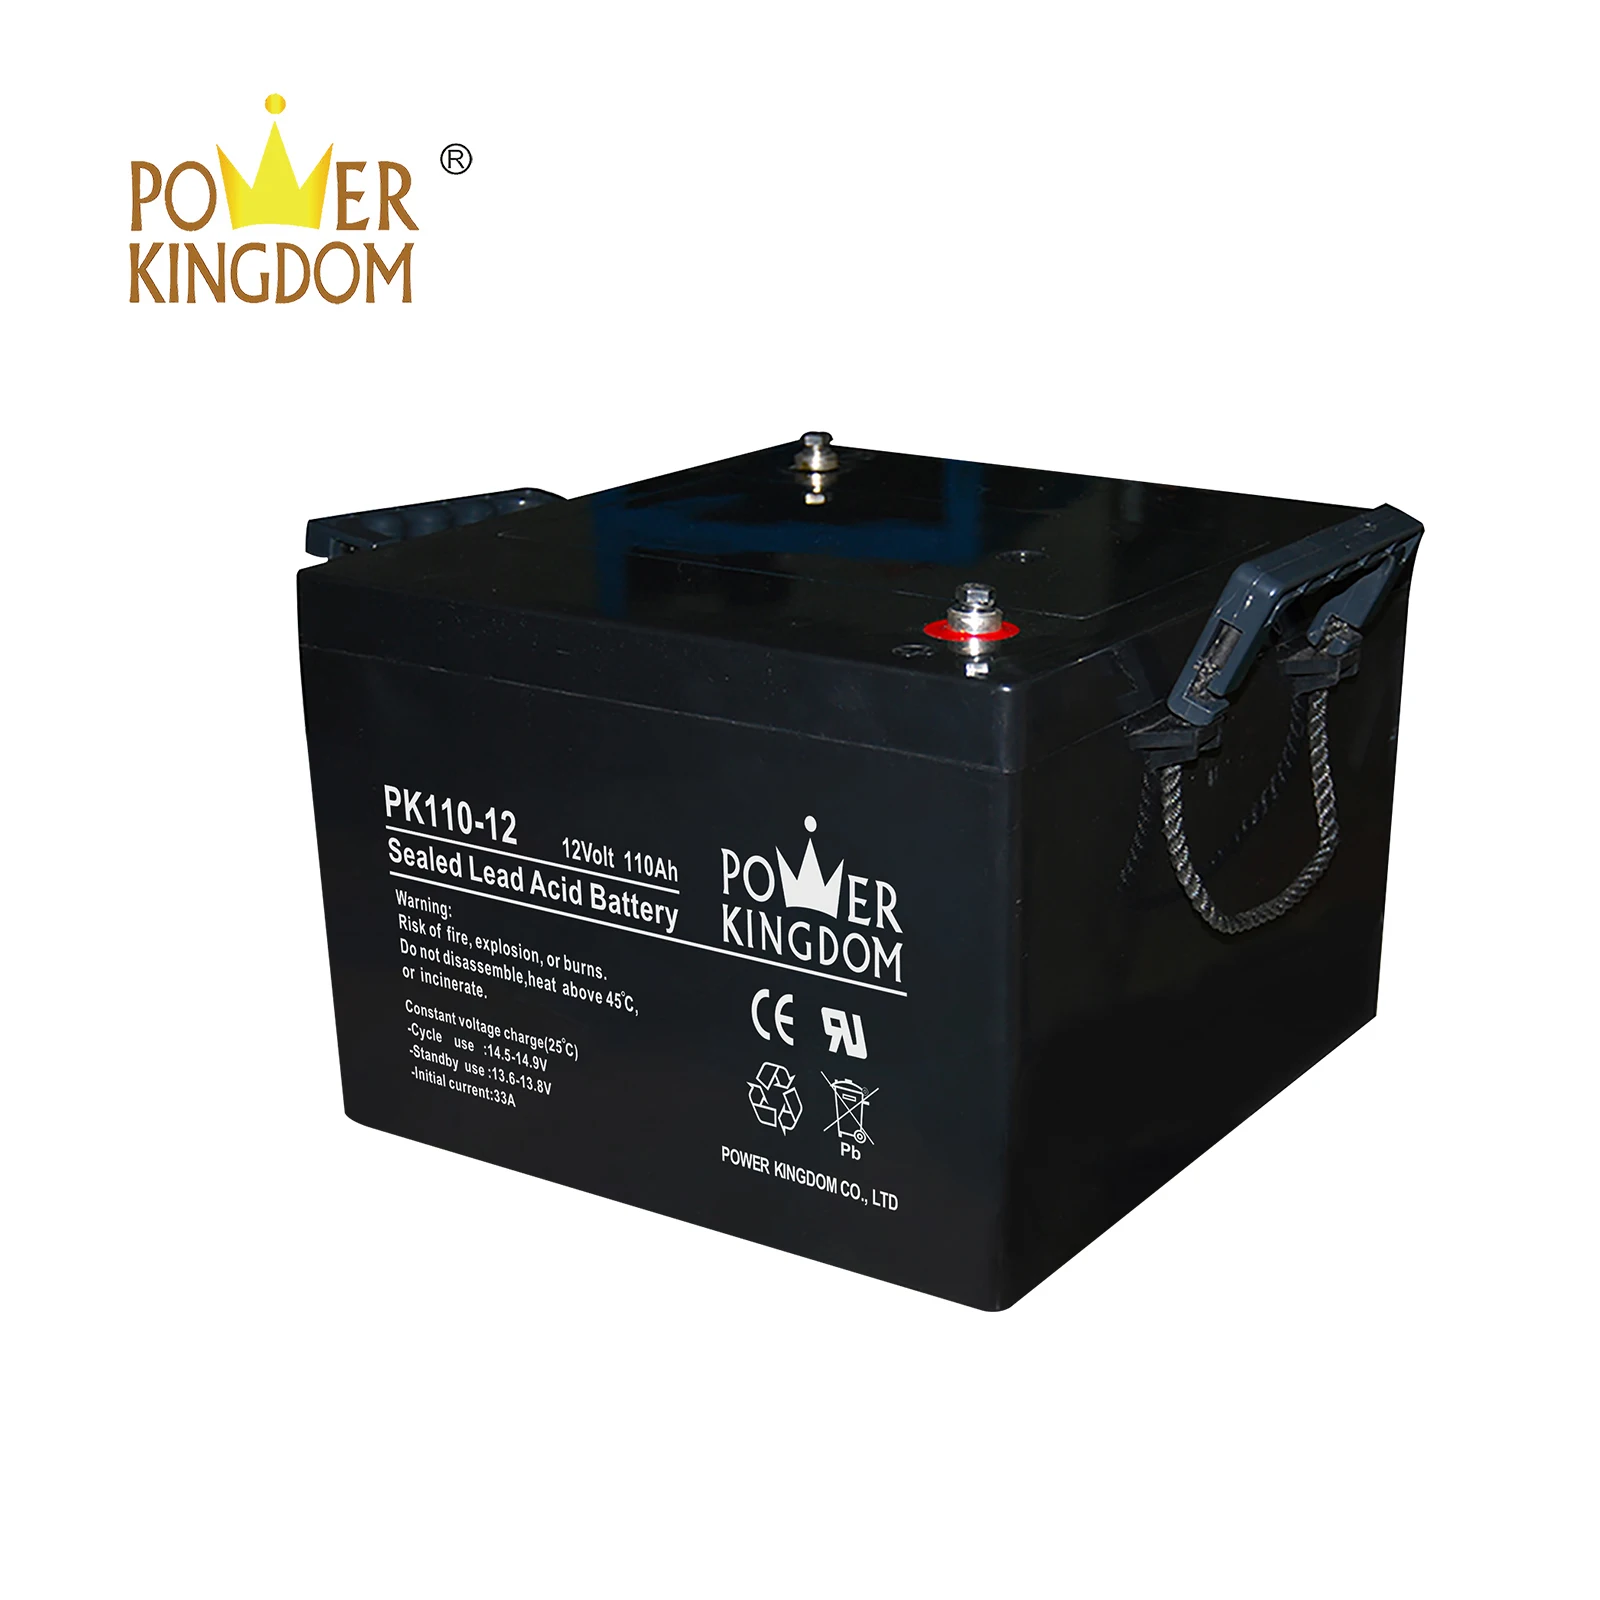 Power Kingdom 6 volt gel cell company solar and wind power system-2